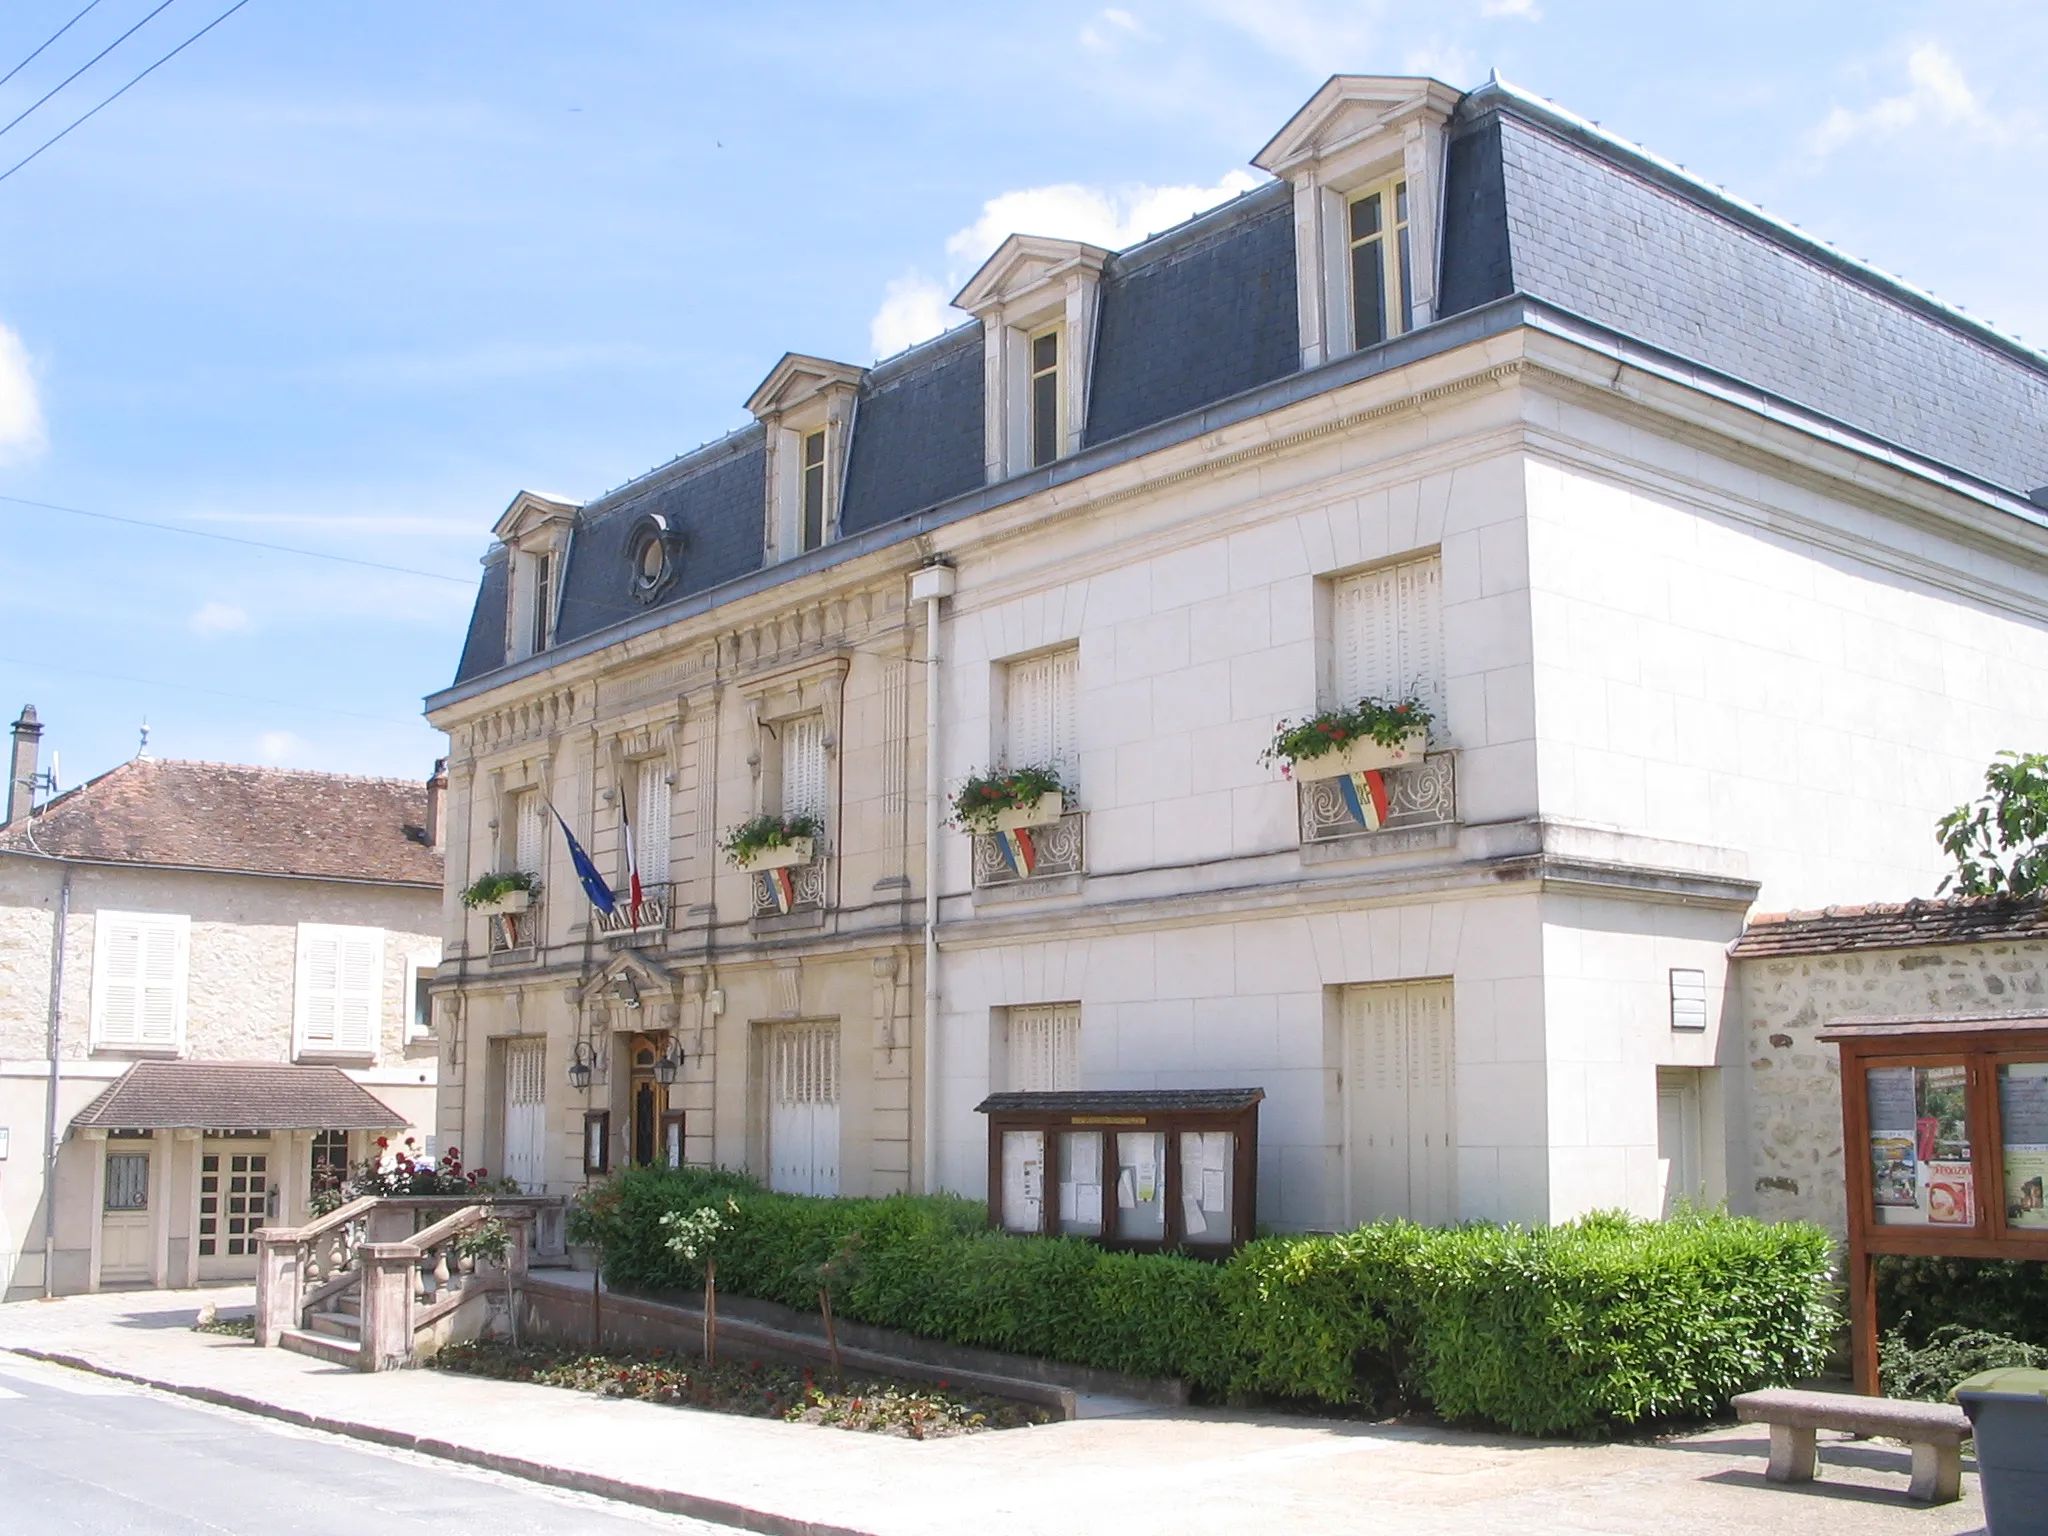 Photo showing: The town hall of Thomery, Seine-et-Marne, France.